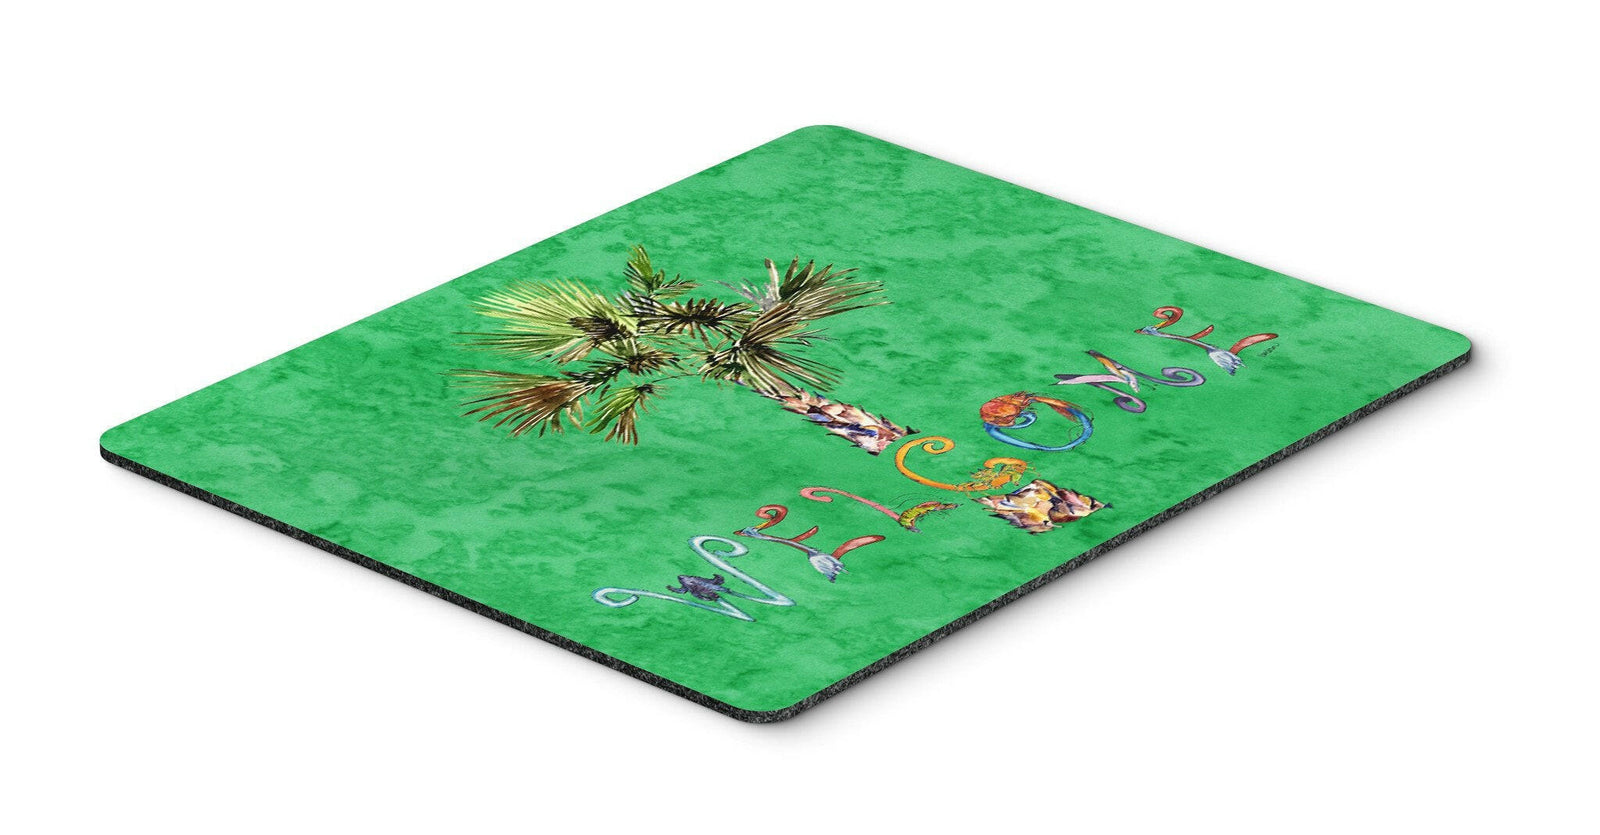 Welcome Palm Tree on Green Mouse Pad, Hot Pad or Trivet 8710MP by Caroline's Treasures